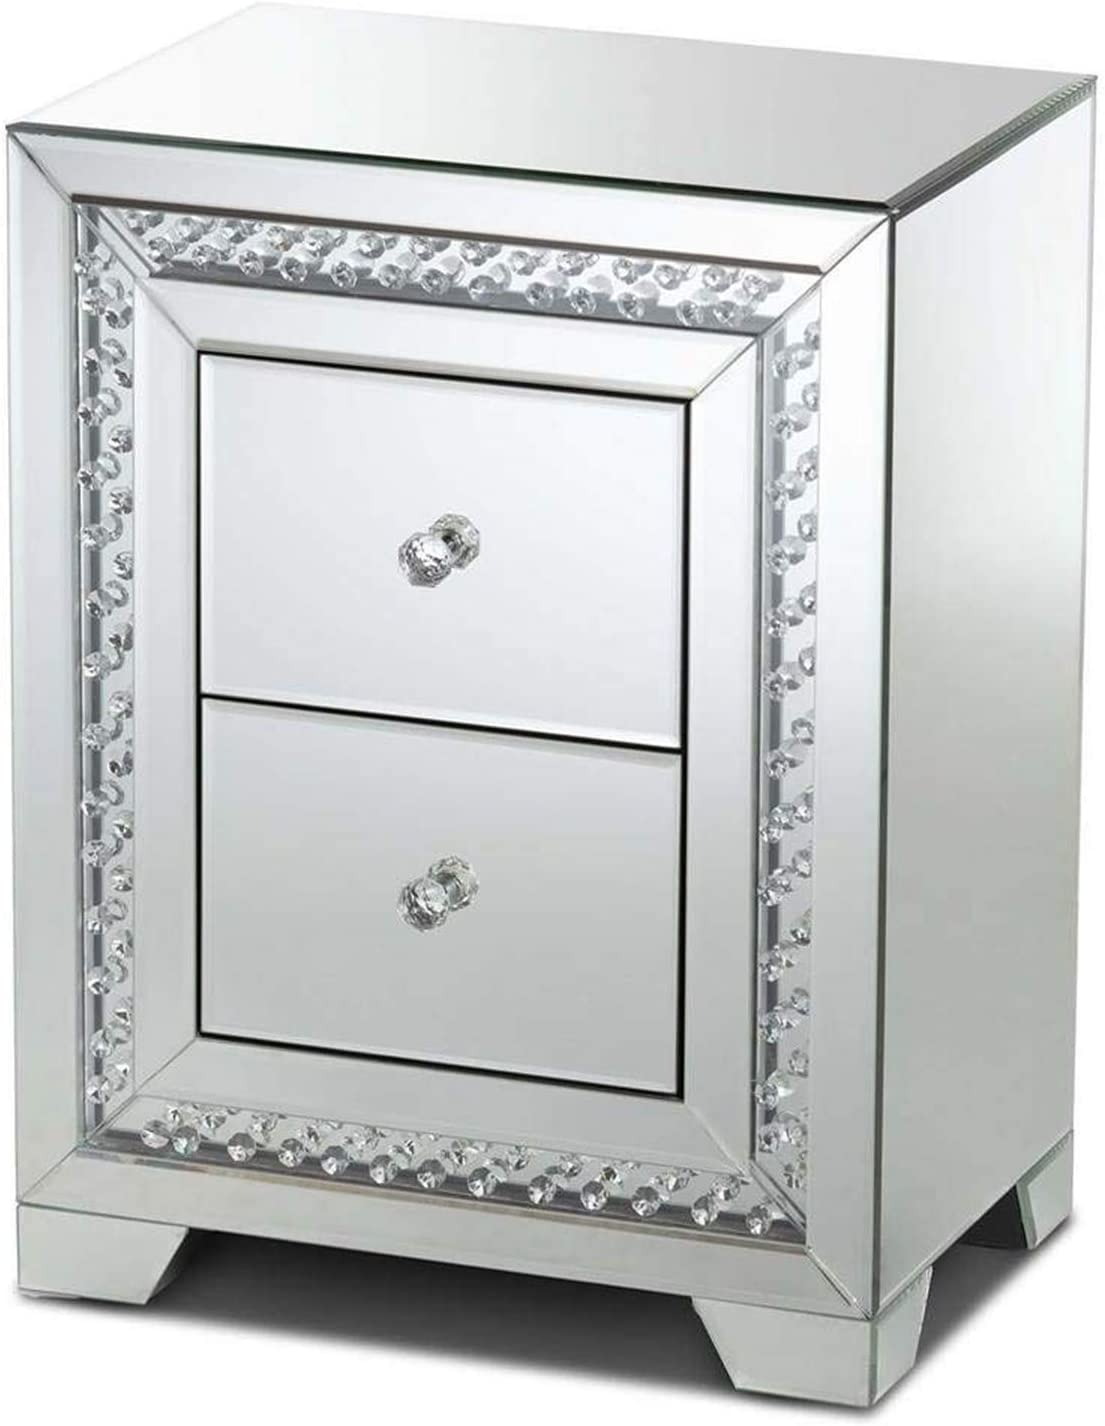 Baxton Studio Mina Modern and Contemporary Hollywood Regency Glamour Style Mirrored 2-Drawer Nightstand Bedside Table